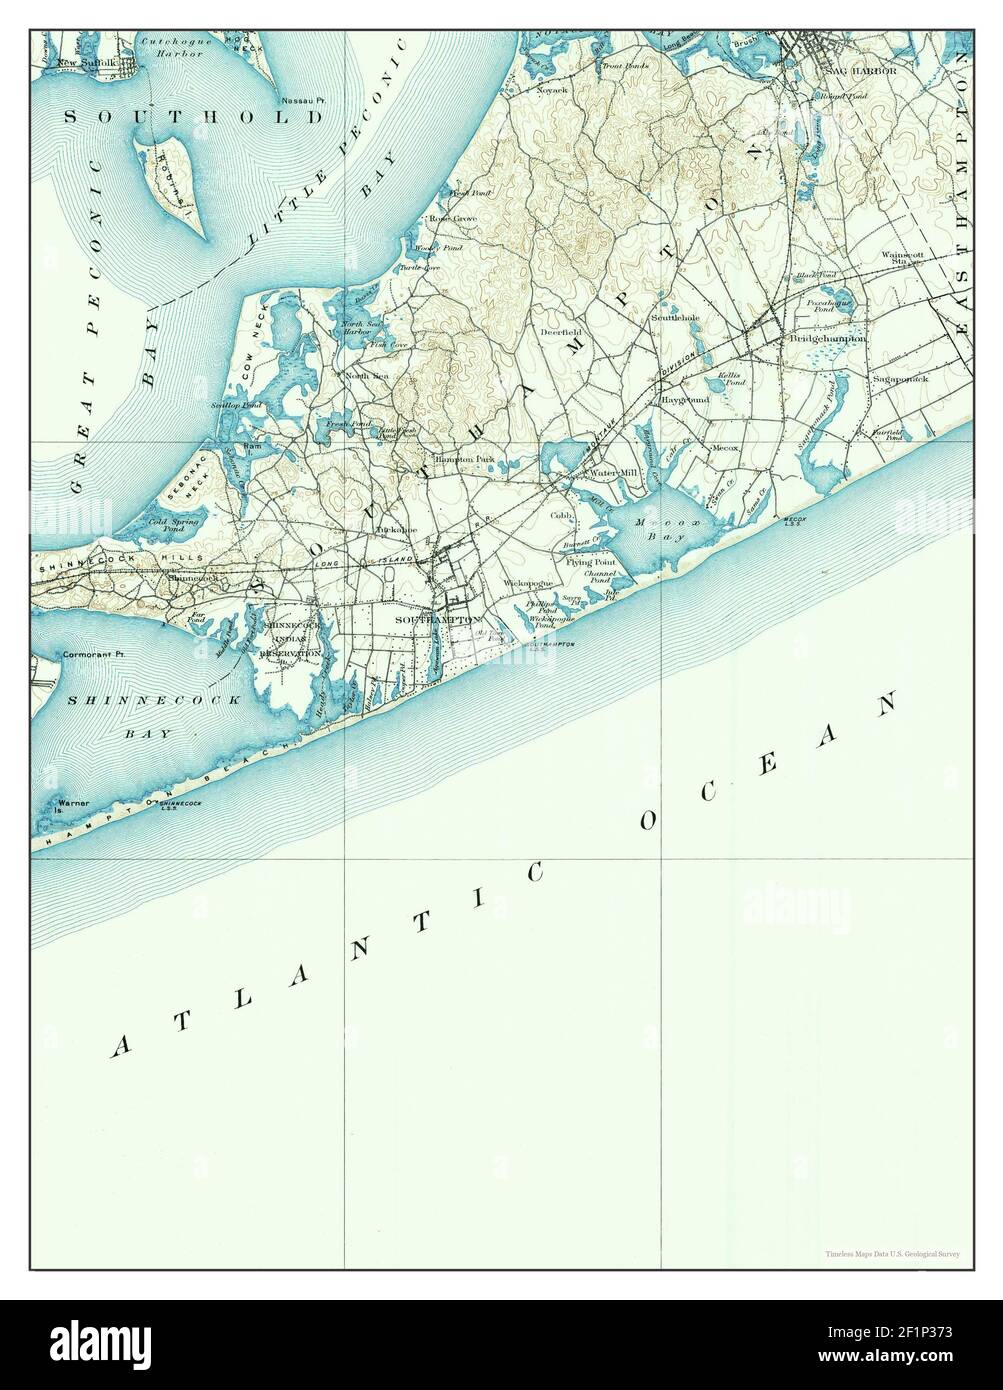 Map of sag harbor hires stock photography and images Alamy